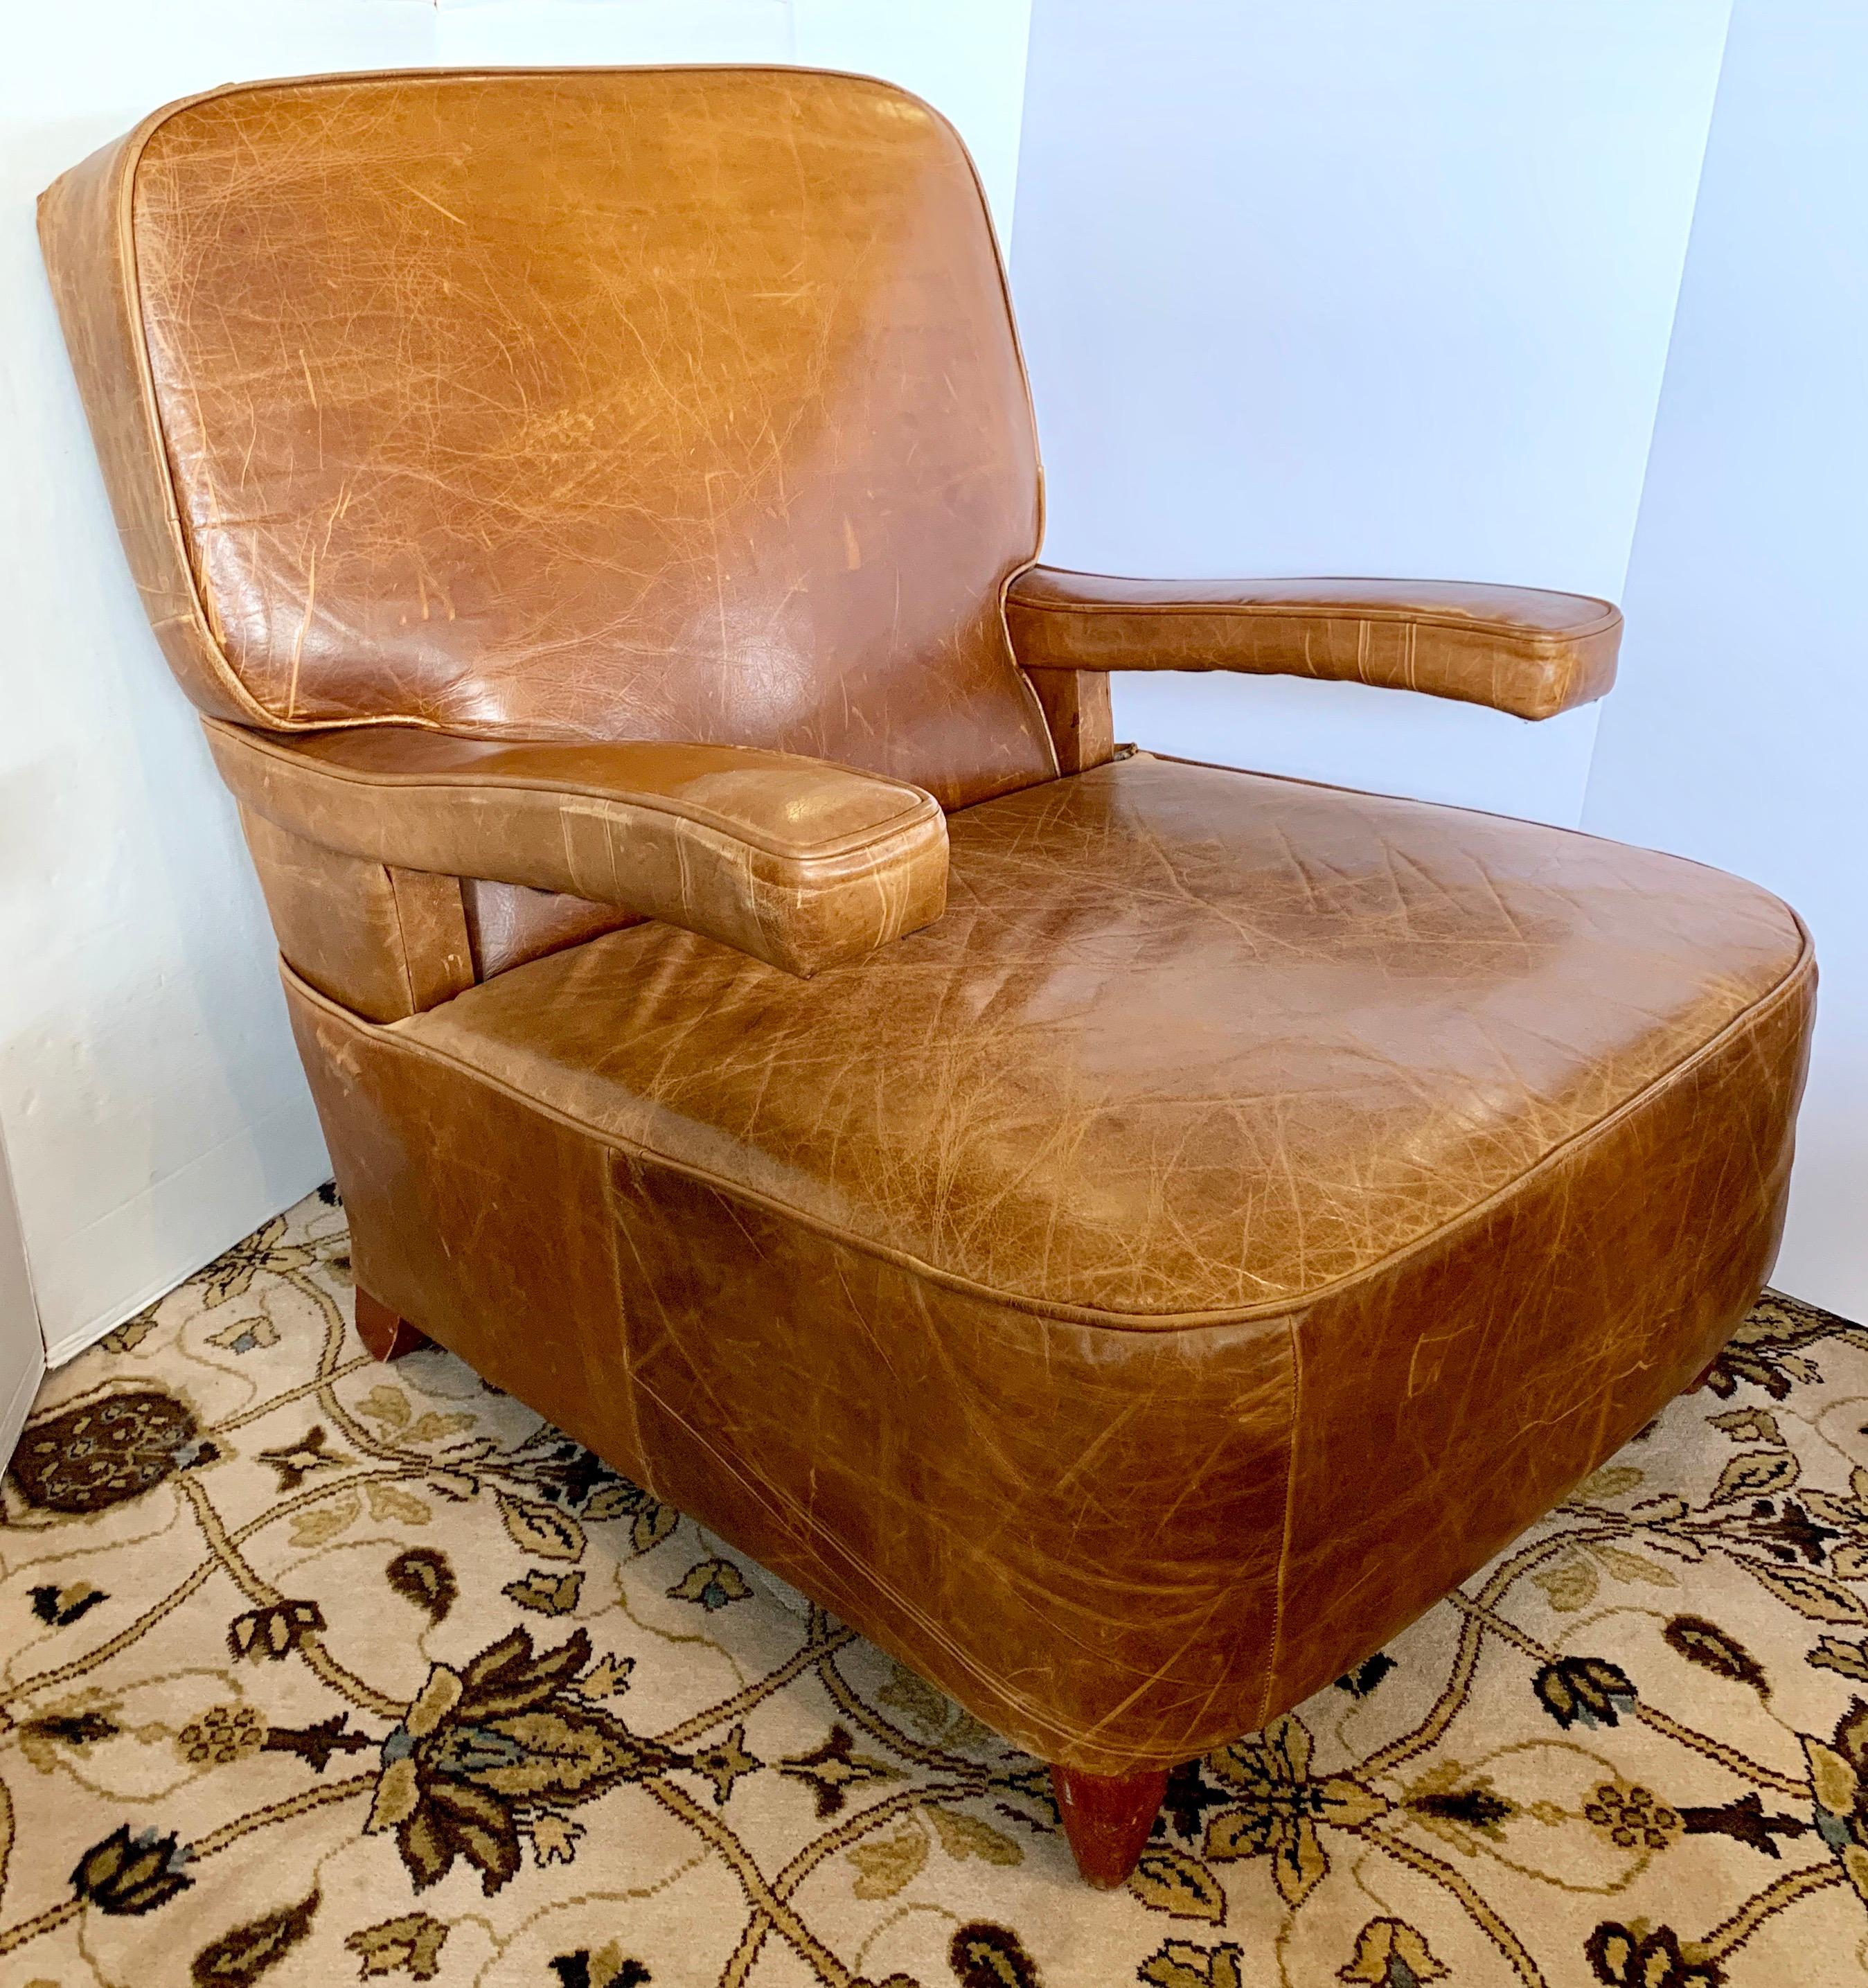 Elegant vintage French leather club chair has floating arms. The leather is brown and of the highest quality with a beautiful patina only acquired through age and use.